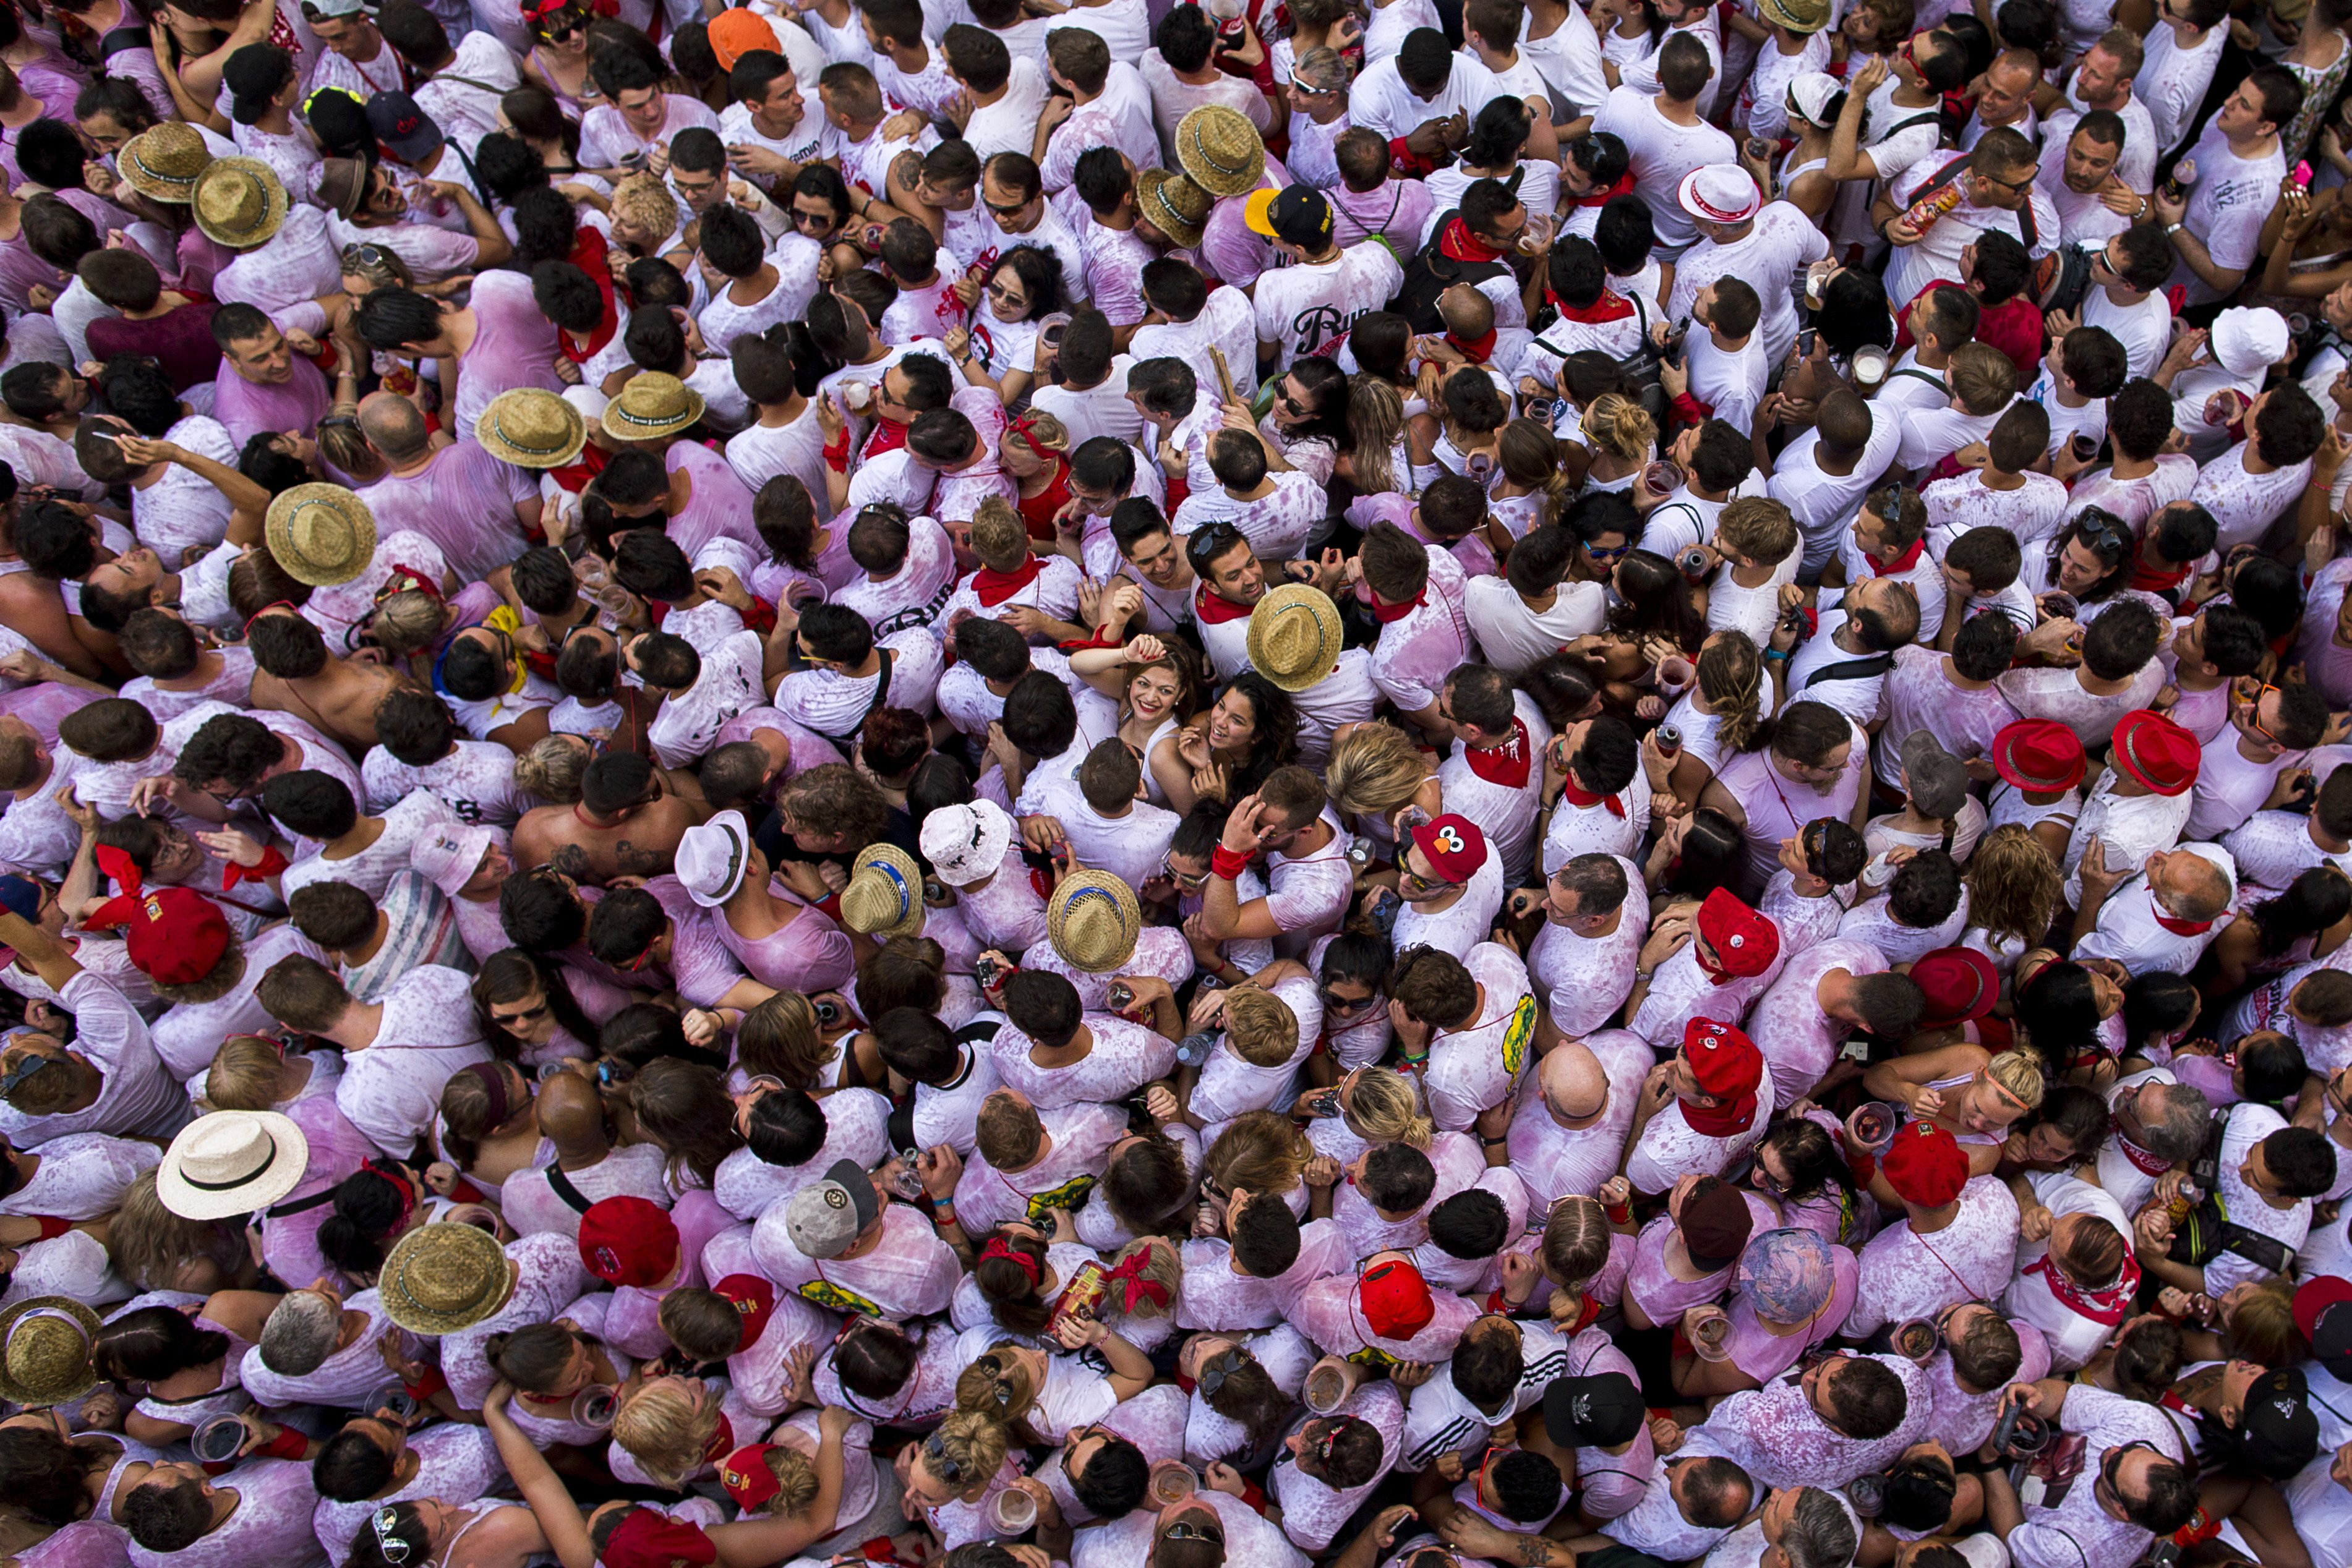 Revelers pack the Pamplona town square during the official opening of the 2015 San Fermin fiestas in Pamplona, Spain on July 6, 2015.